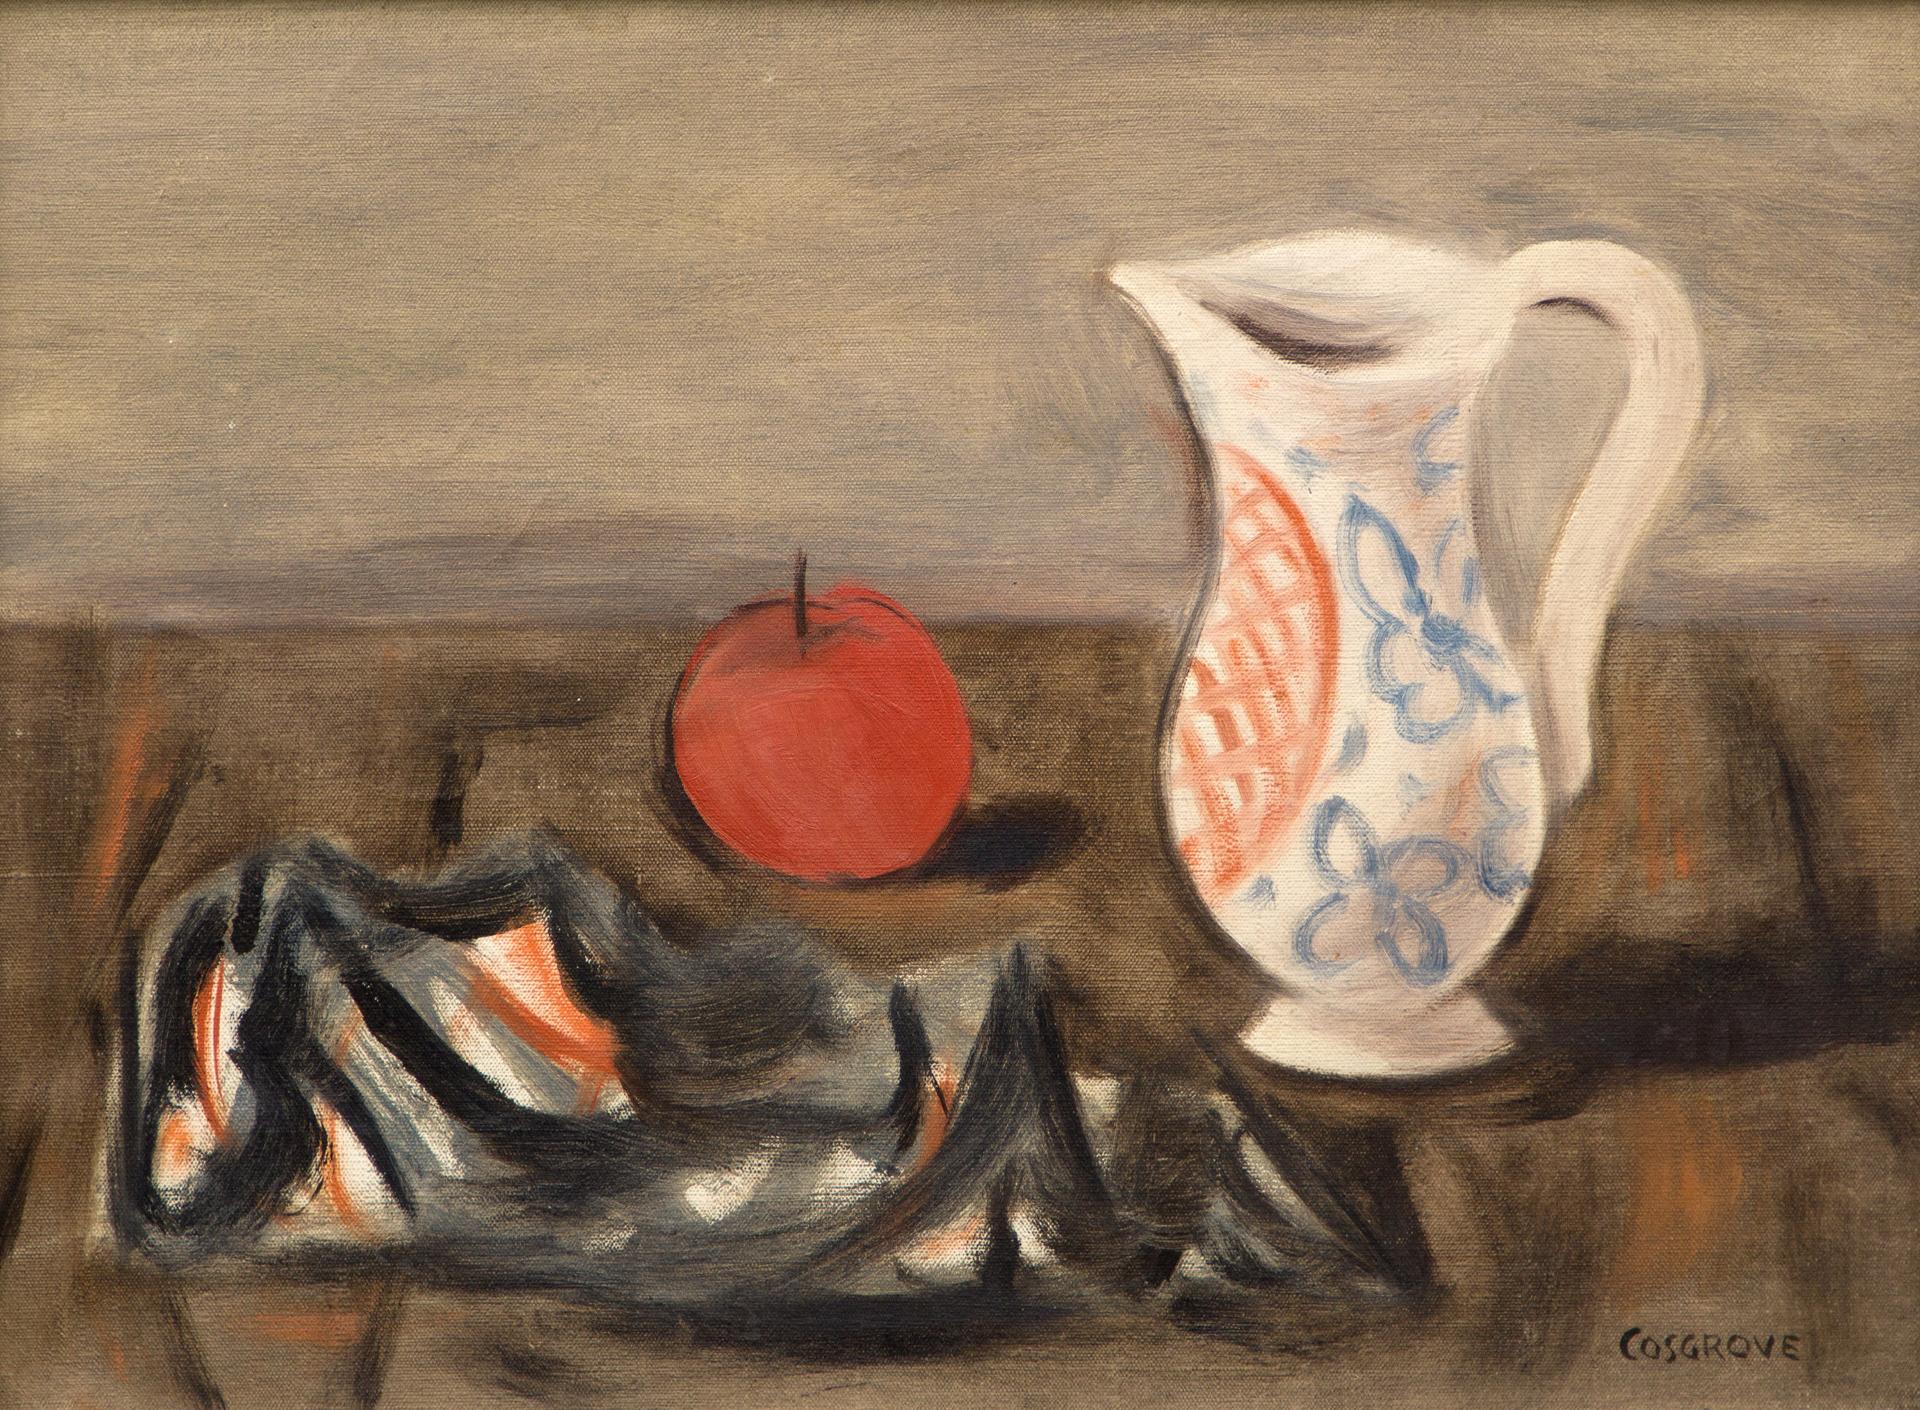 Stanley Morel Cosgrove (1911-2002) - Still Life with Red Apple, c. 1953